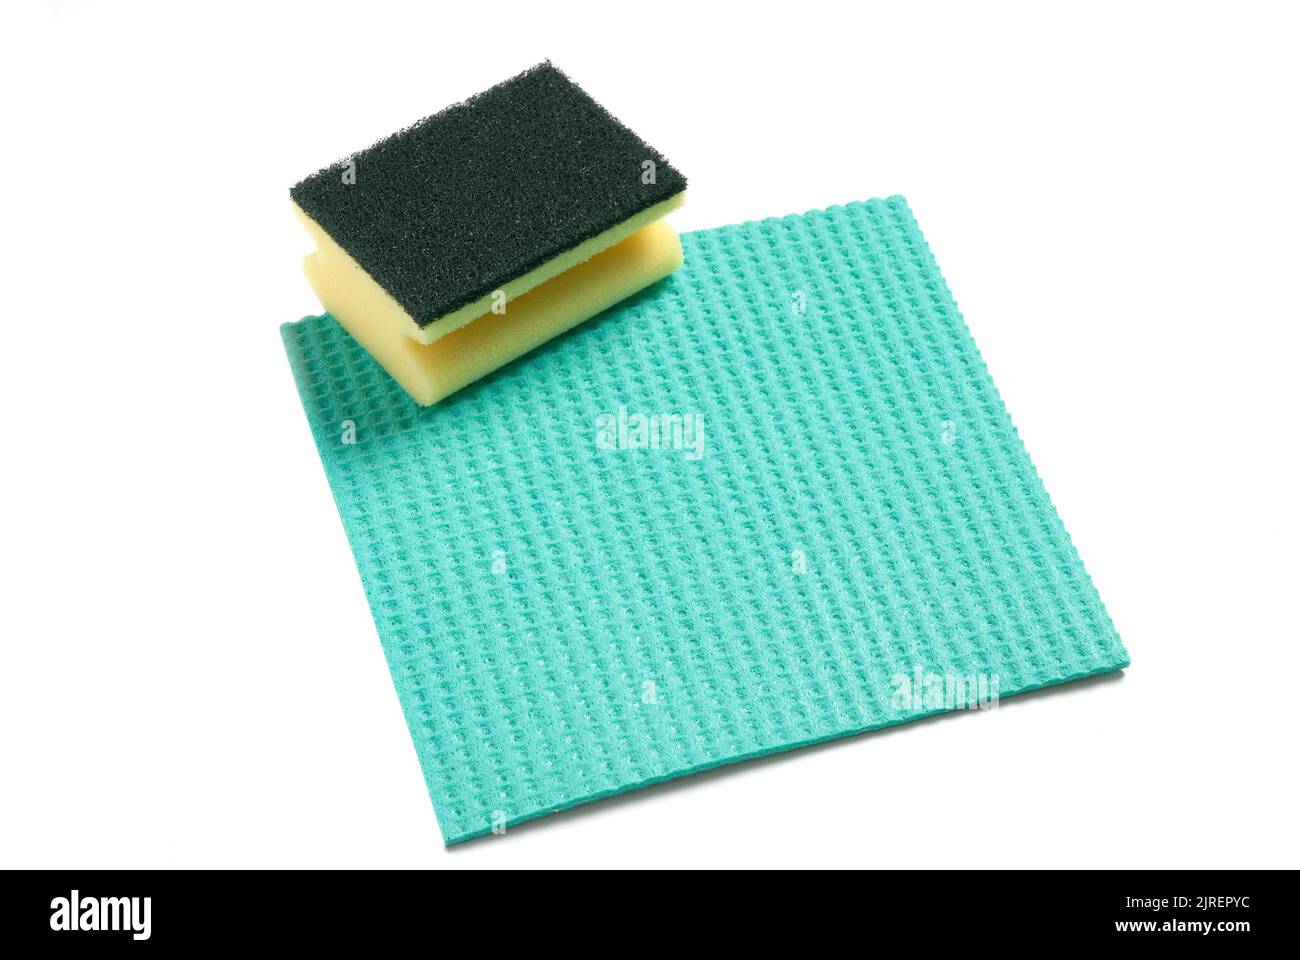 Cleaning cloth and sponge scouring pad, cut out on white. Stock Photo